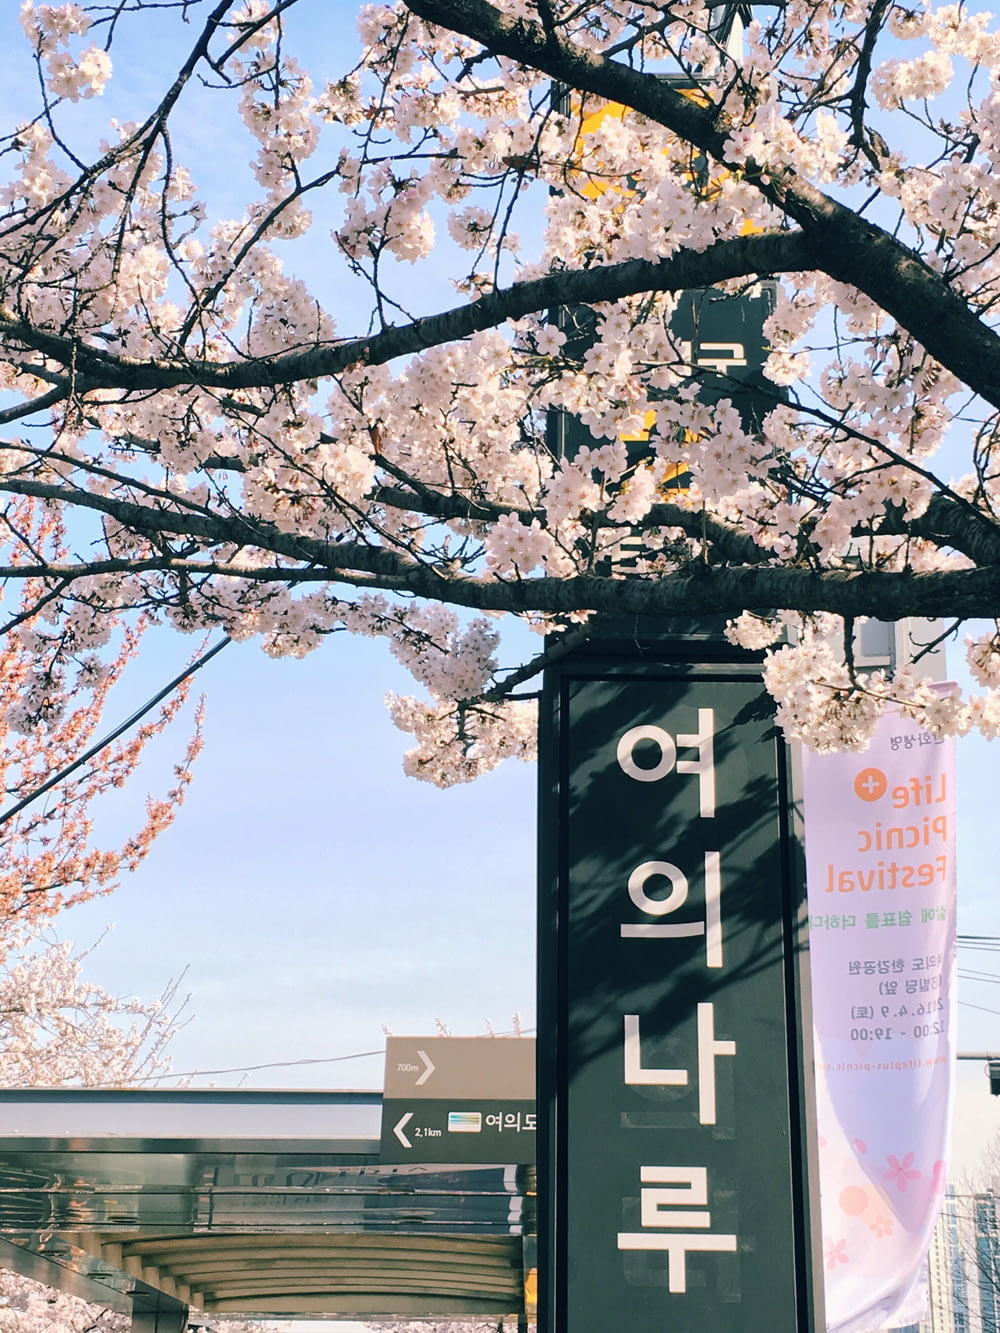 green shed sign with Hangul text during daytime beside tree with light pink flowers during daytime